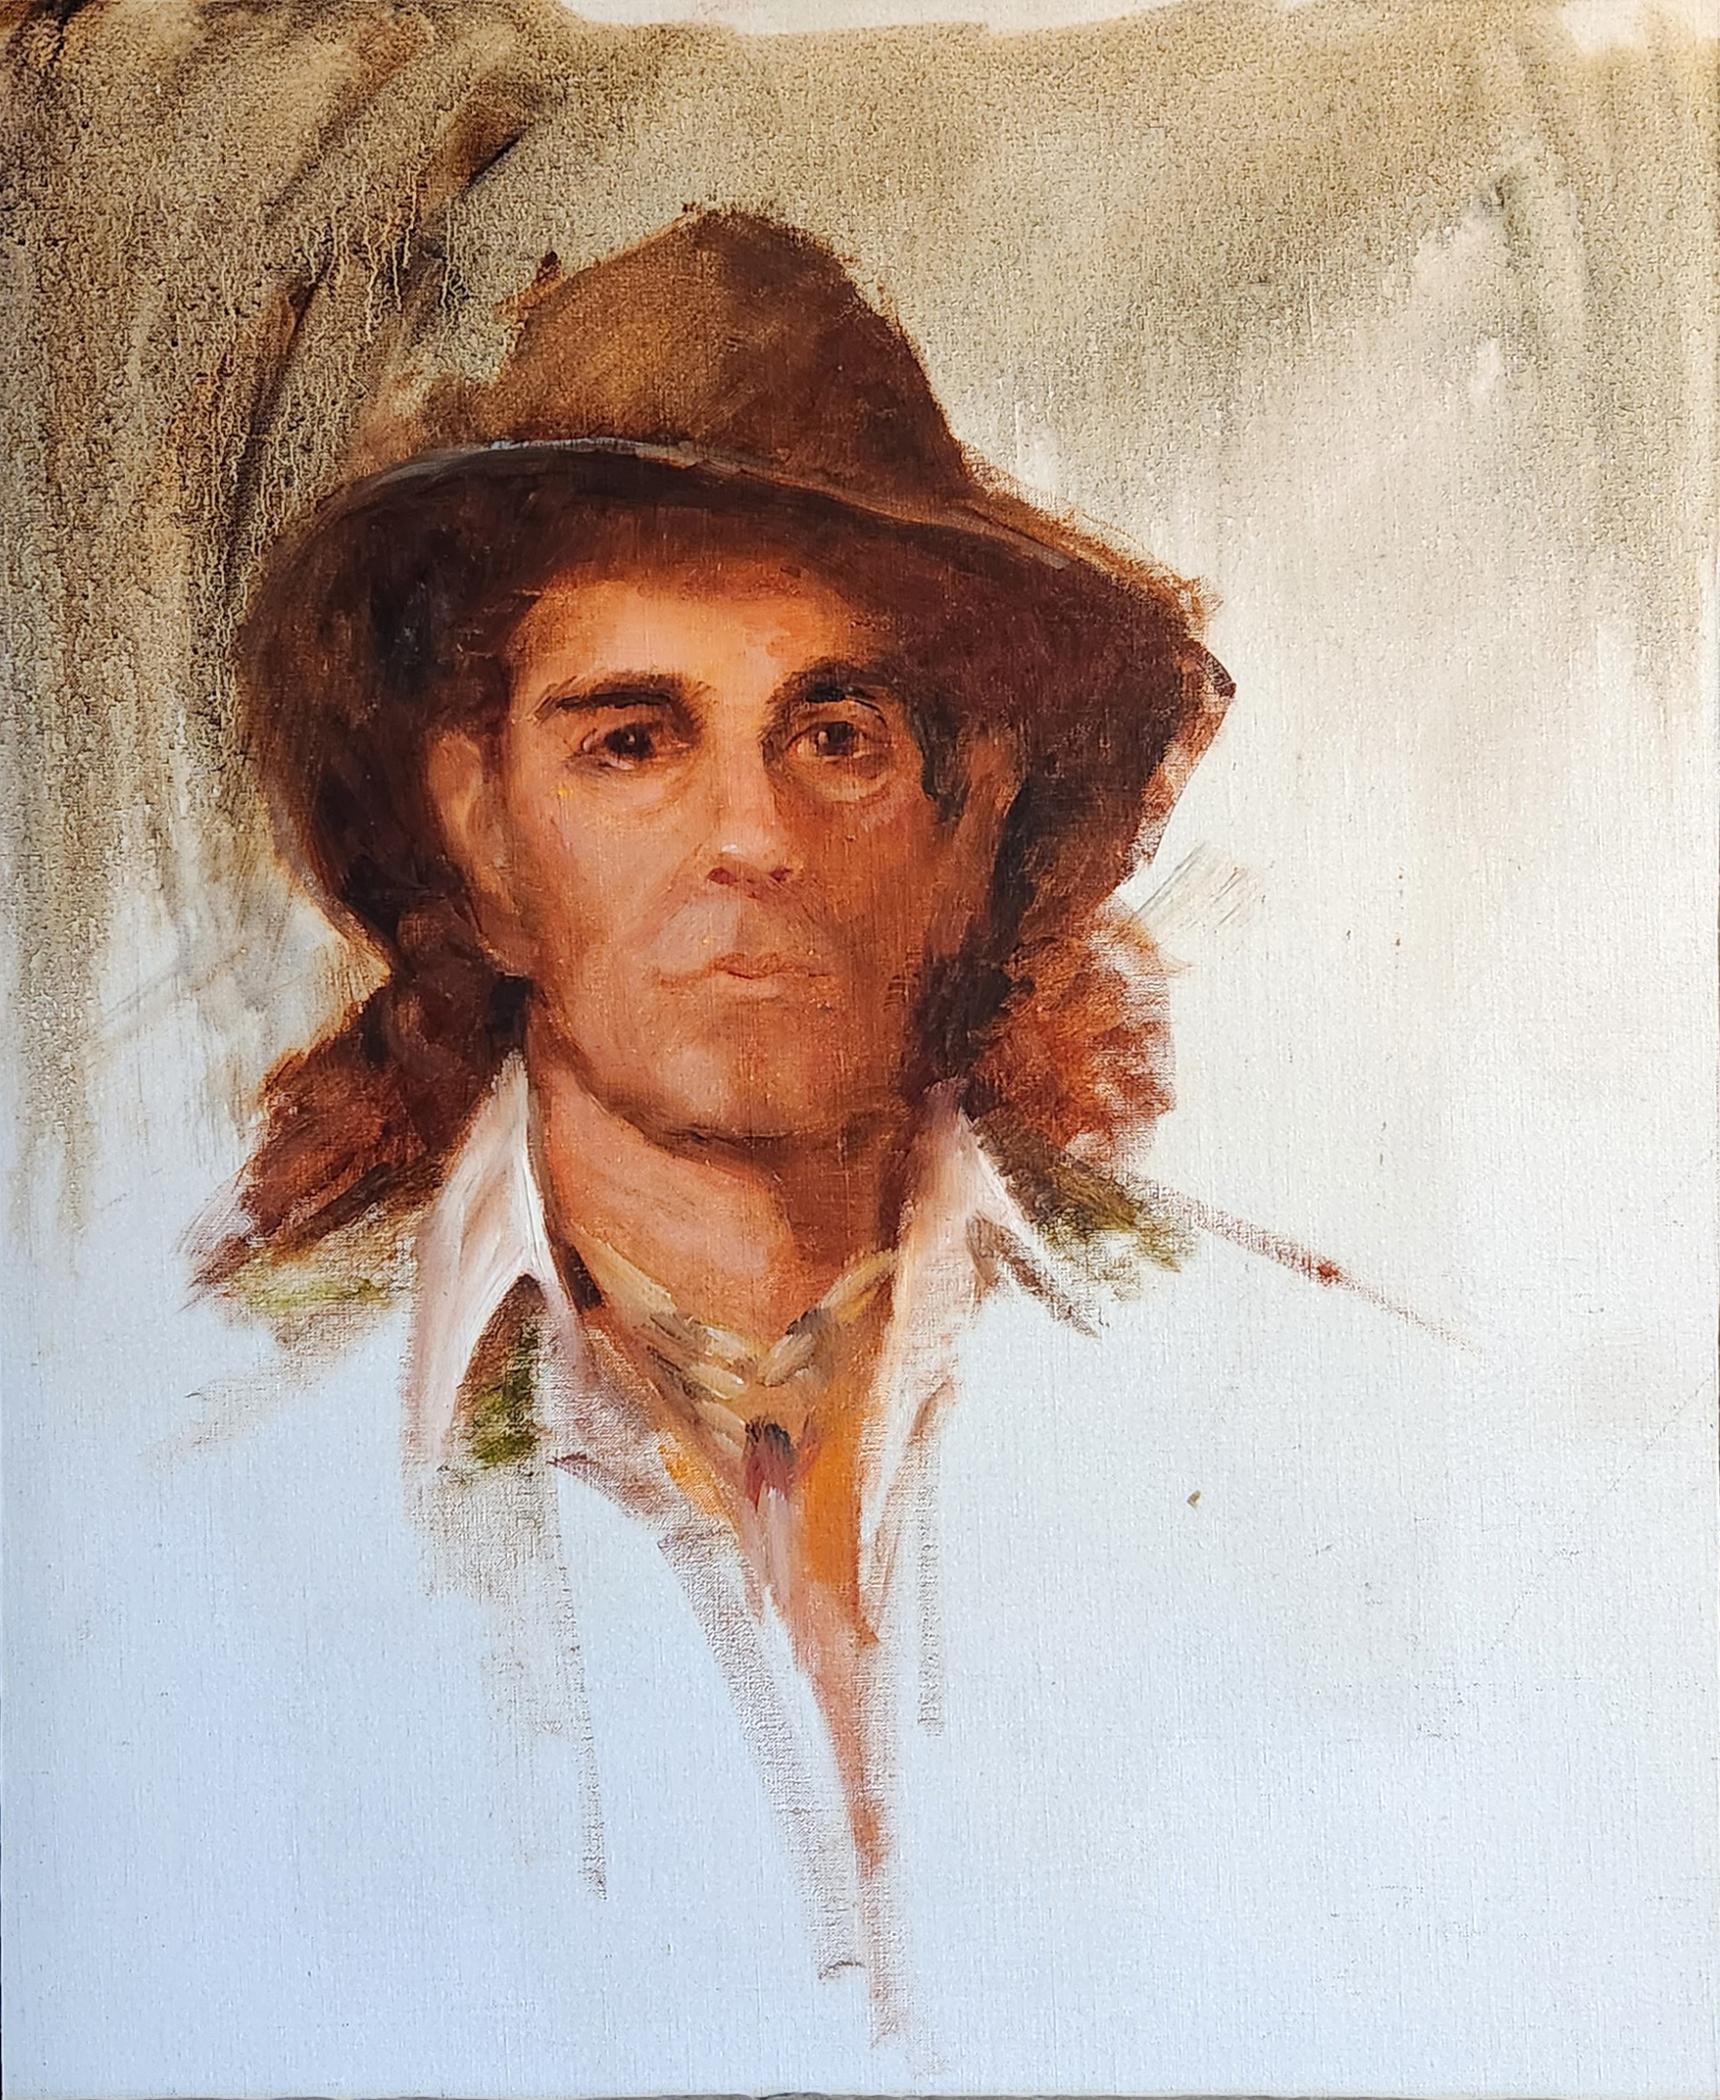 Lu Haskew Figurative Painting - The Hat, 20x16" oil on board